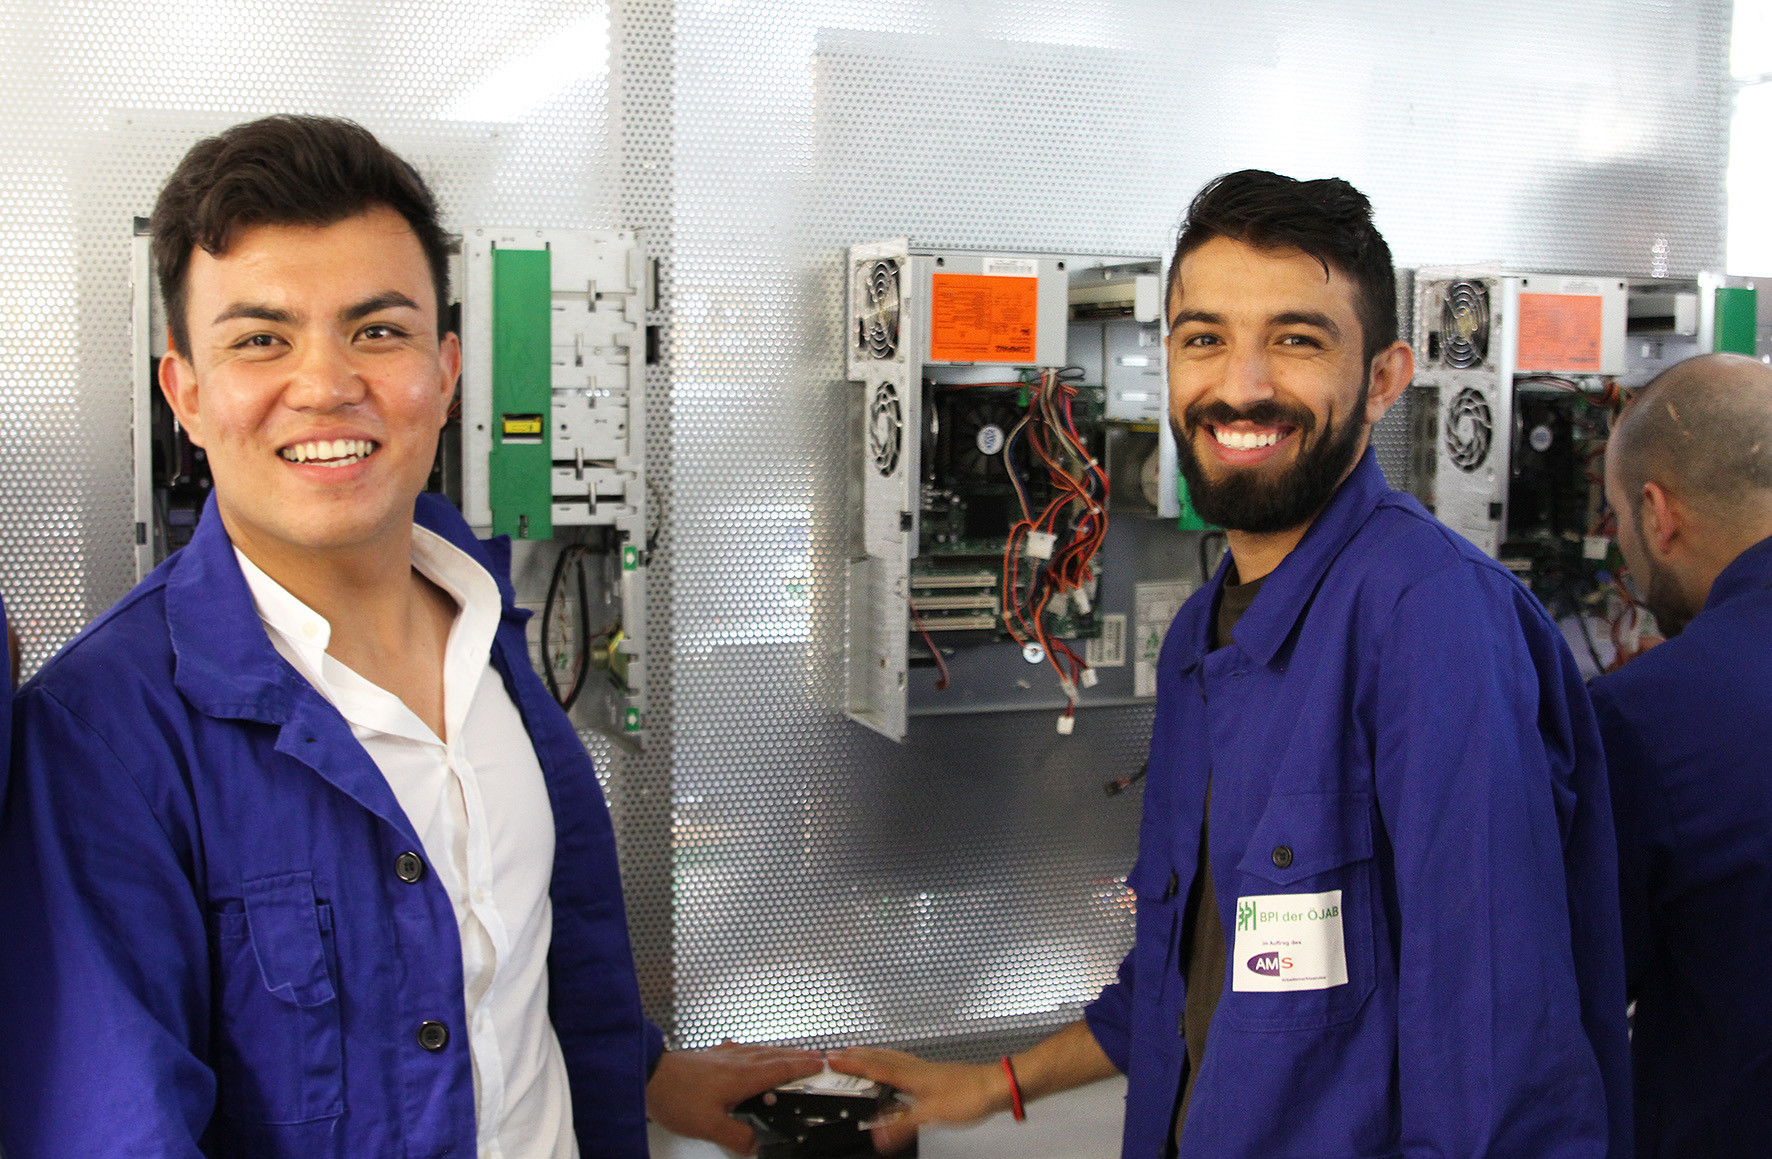 2 participants of an vocational training in front of electrics. 